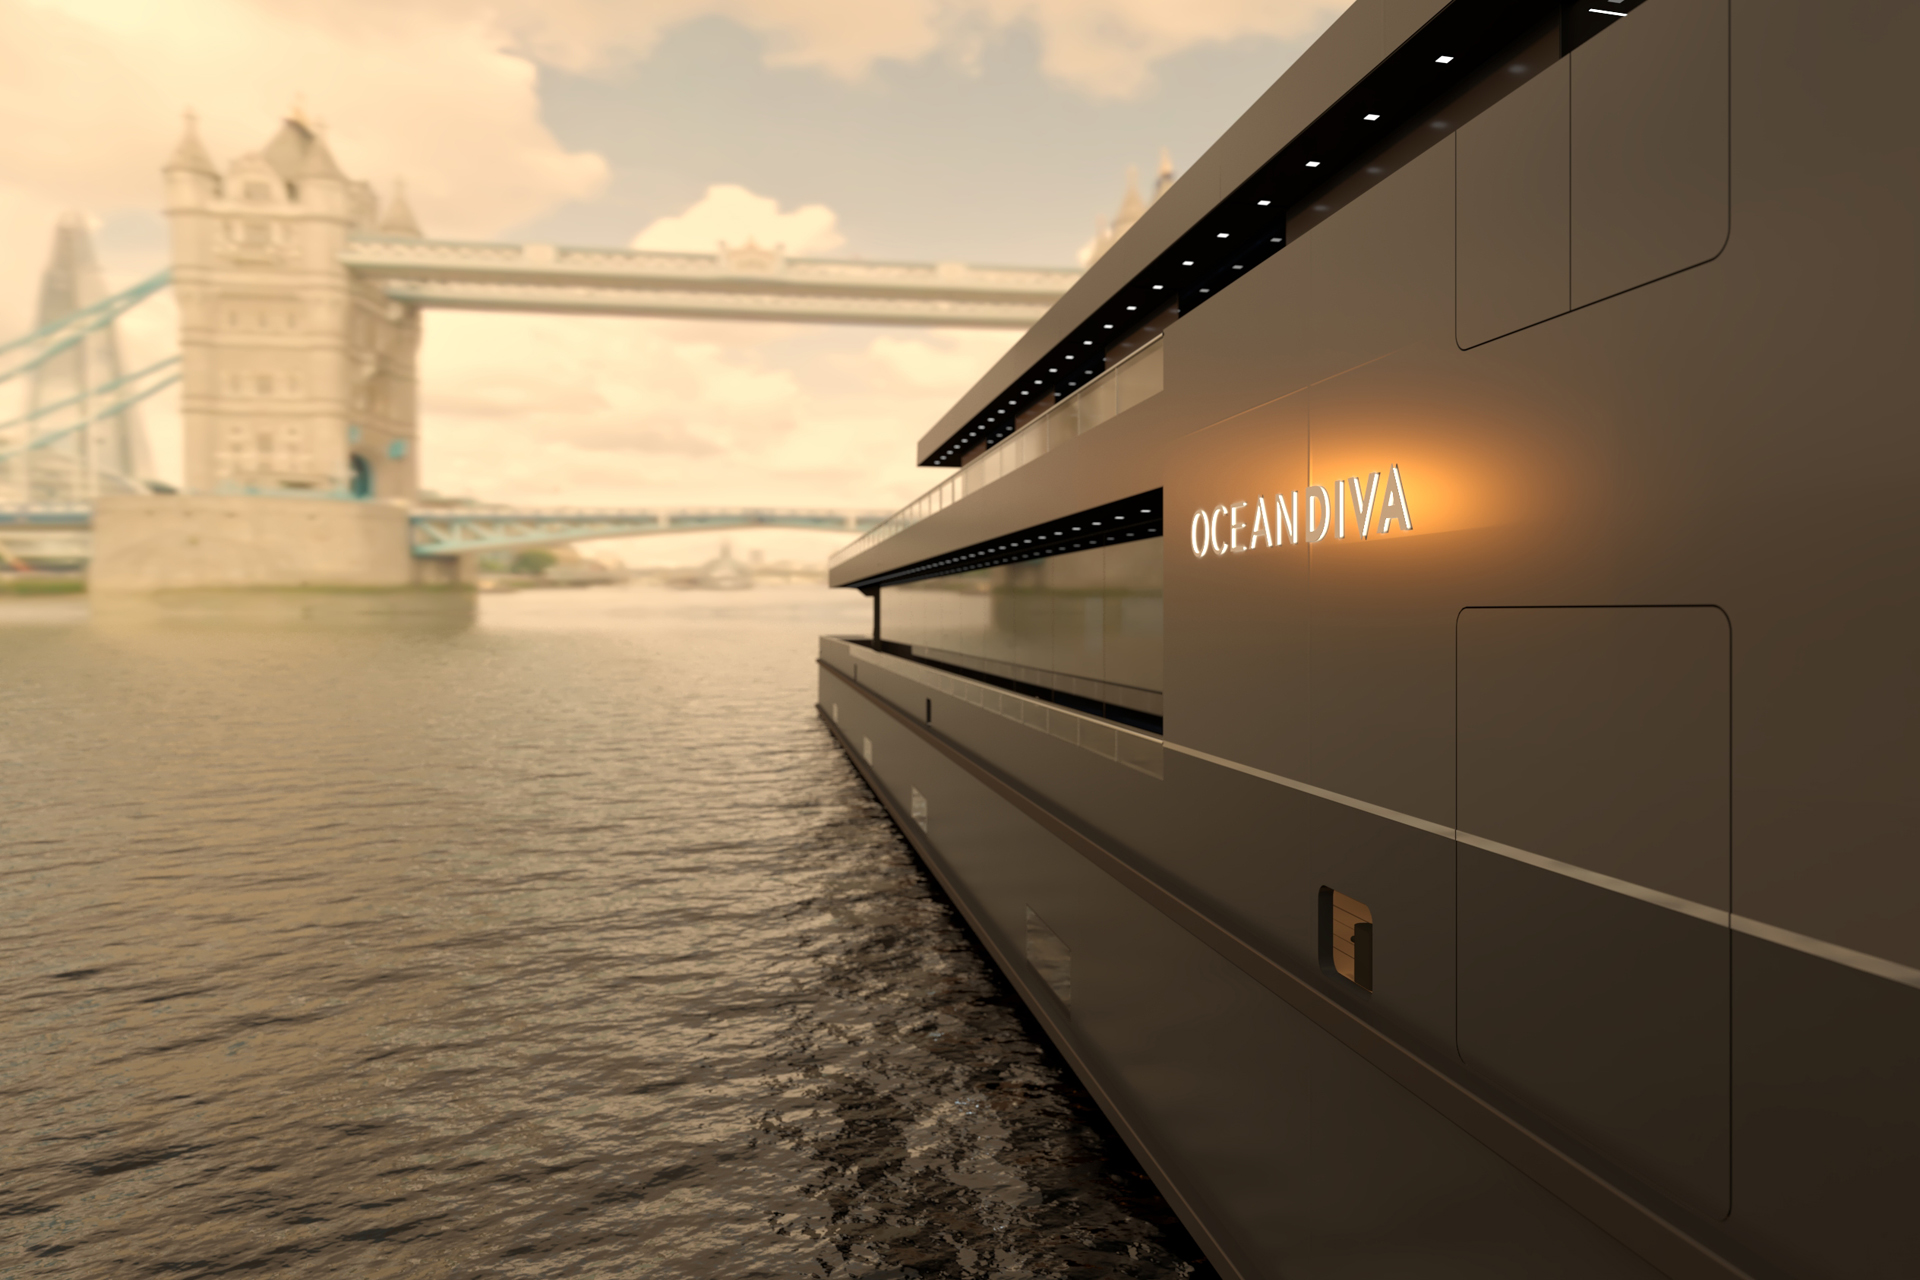 An artist impression of an Oceandiva boat, with Tower Bridge in the background